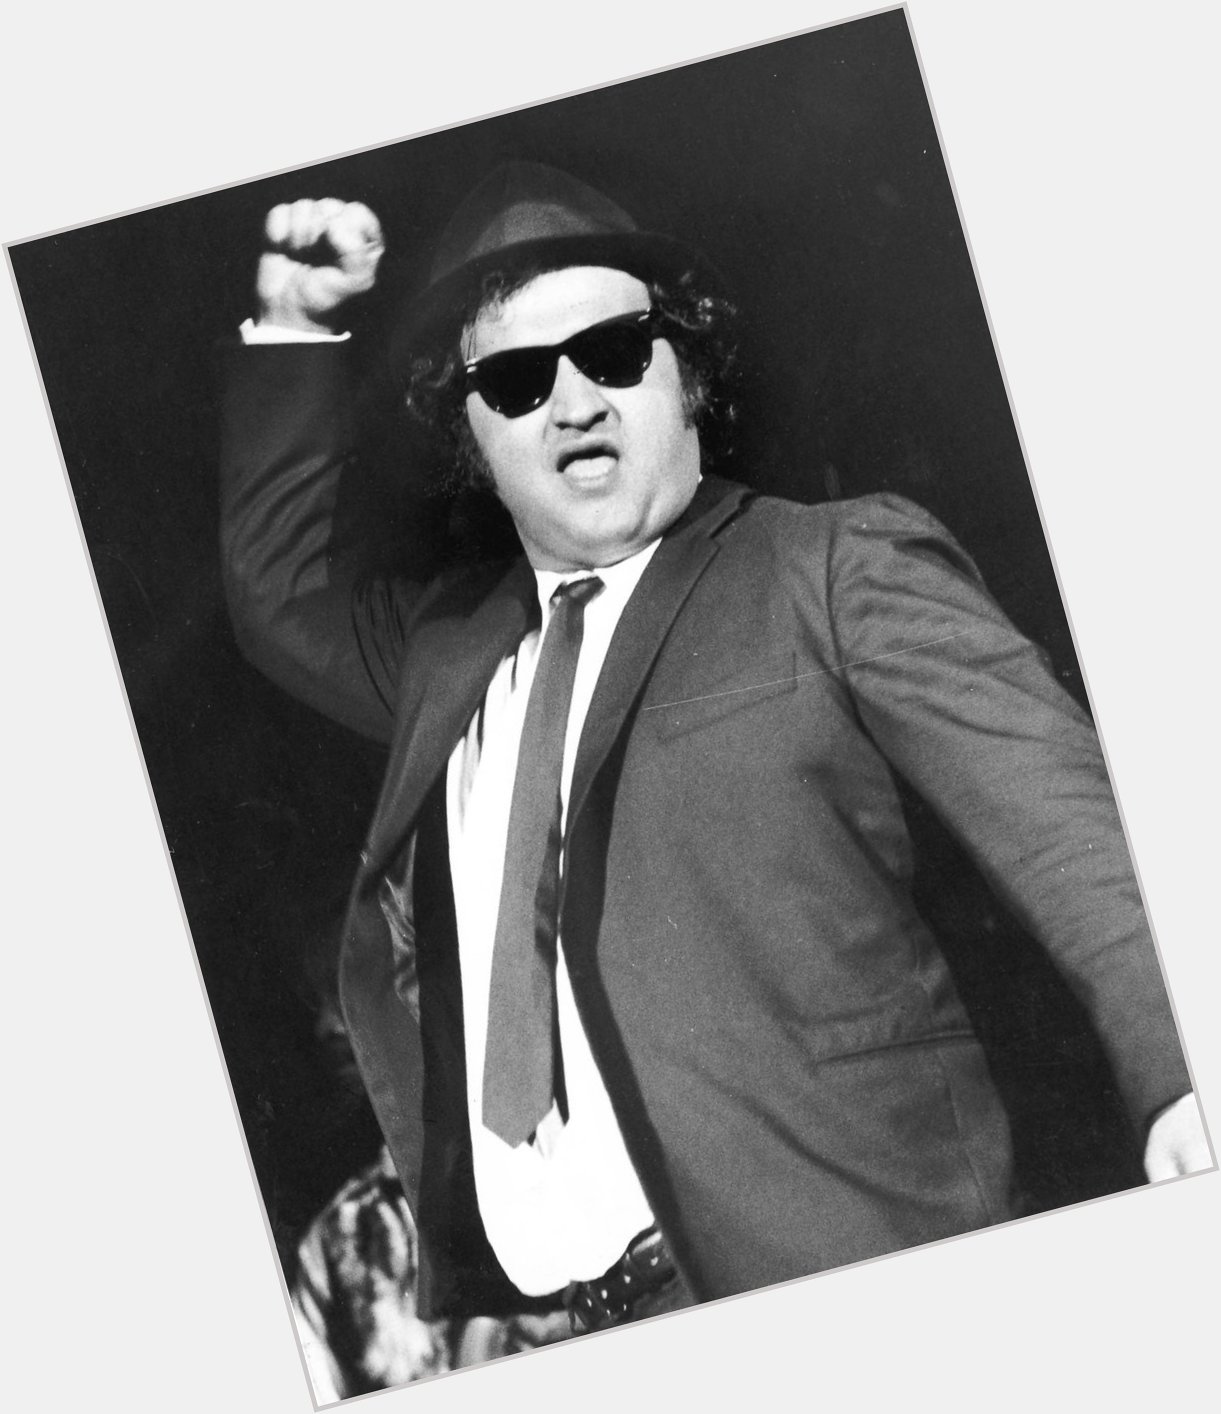 Happy Birthday to John Belushi, who would have turned 68 today! 